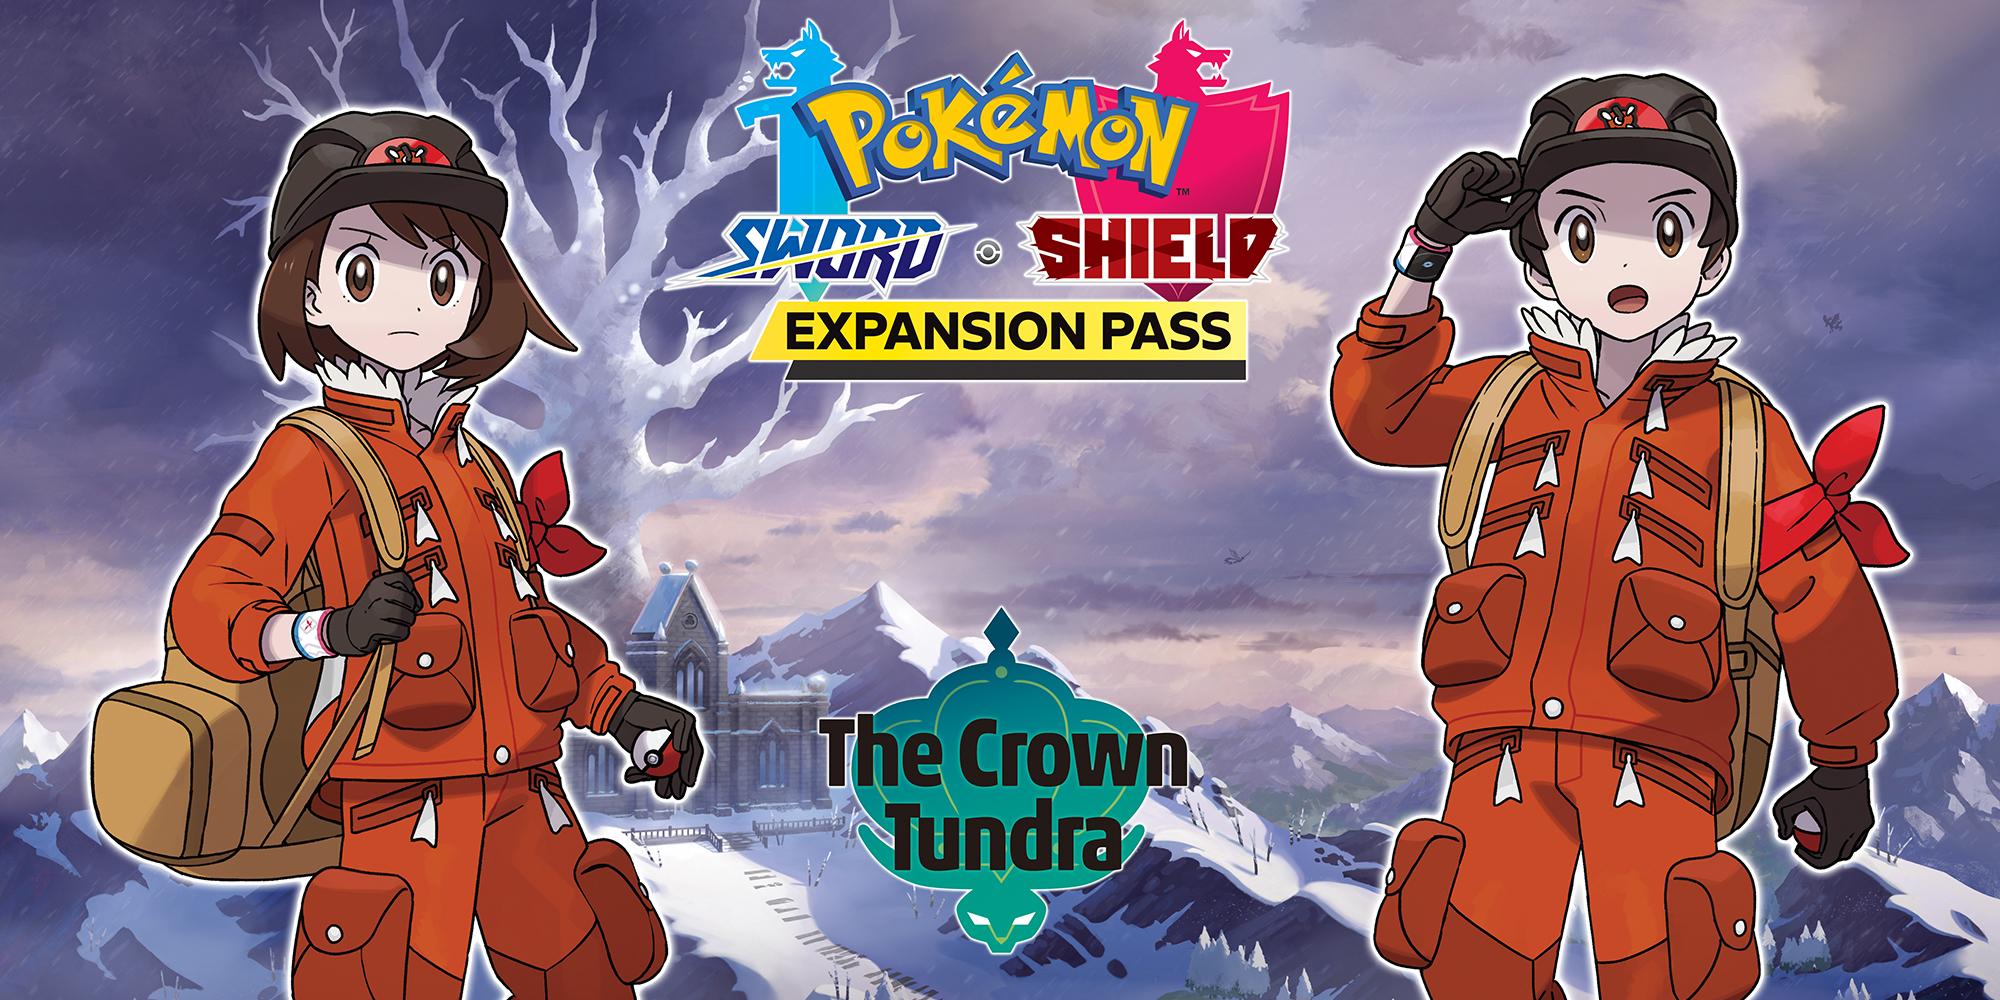 Pokemon Sword/Shield Complete Edition and Crown Tundra Release Date’s Announced